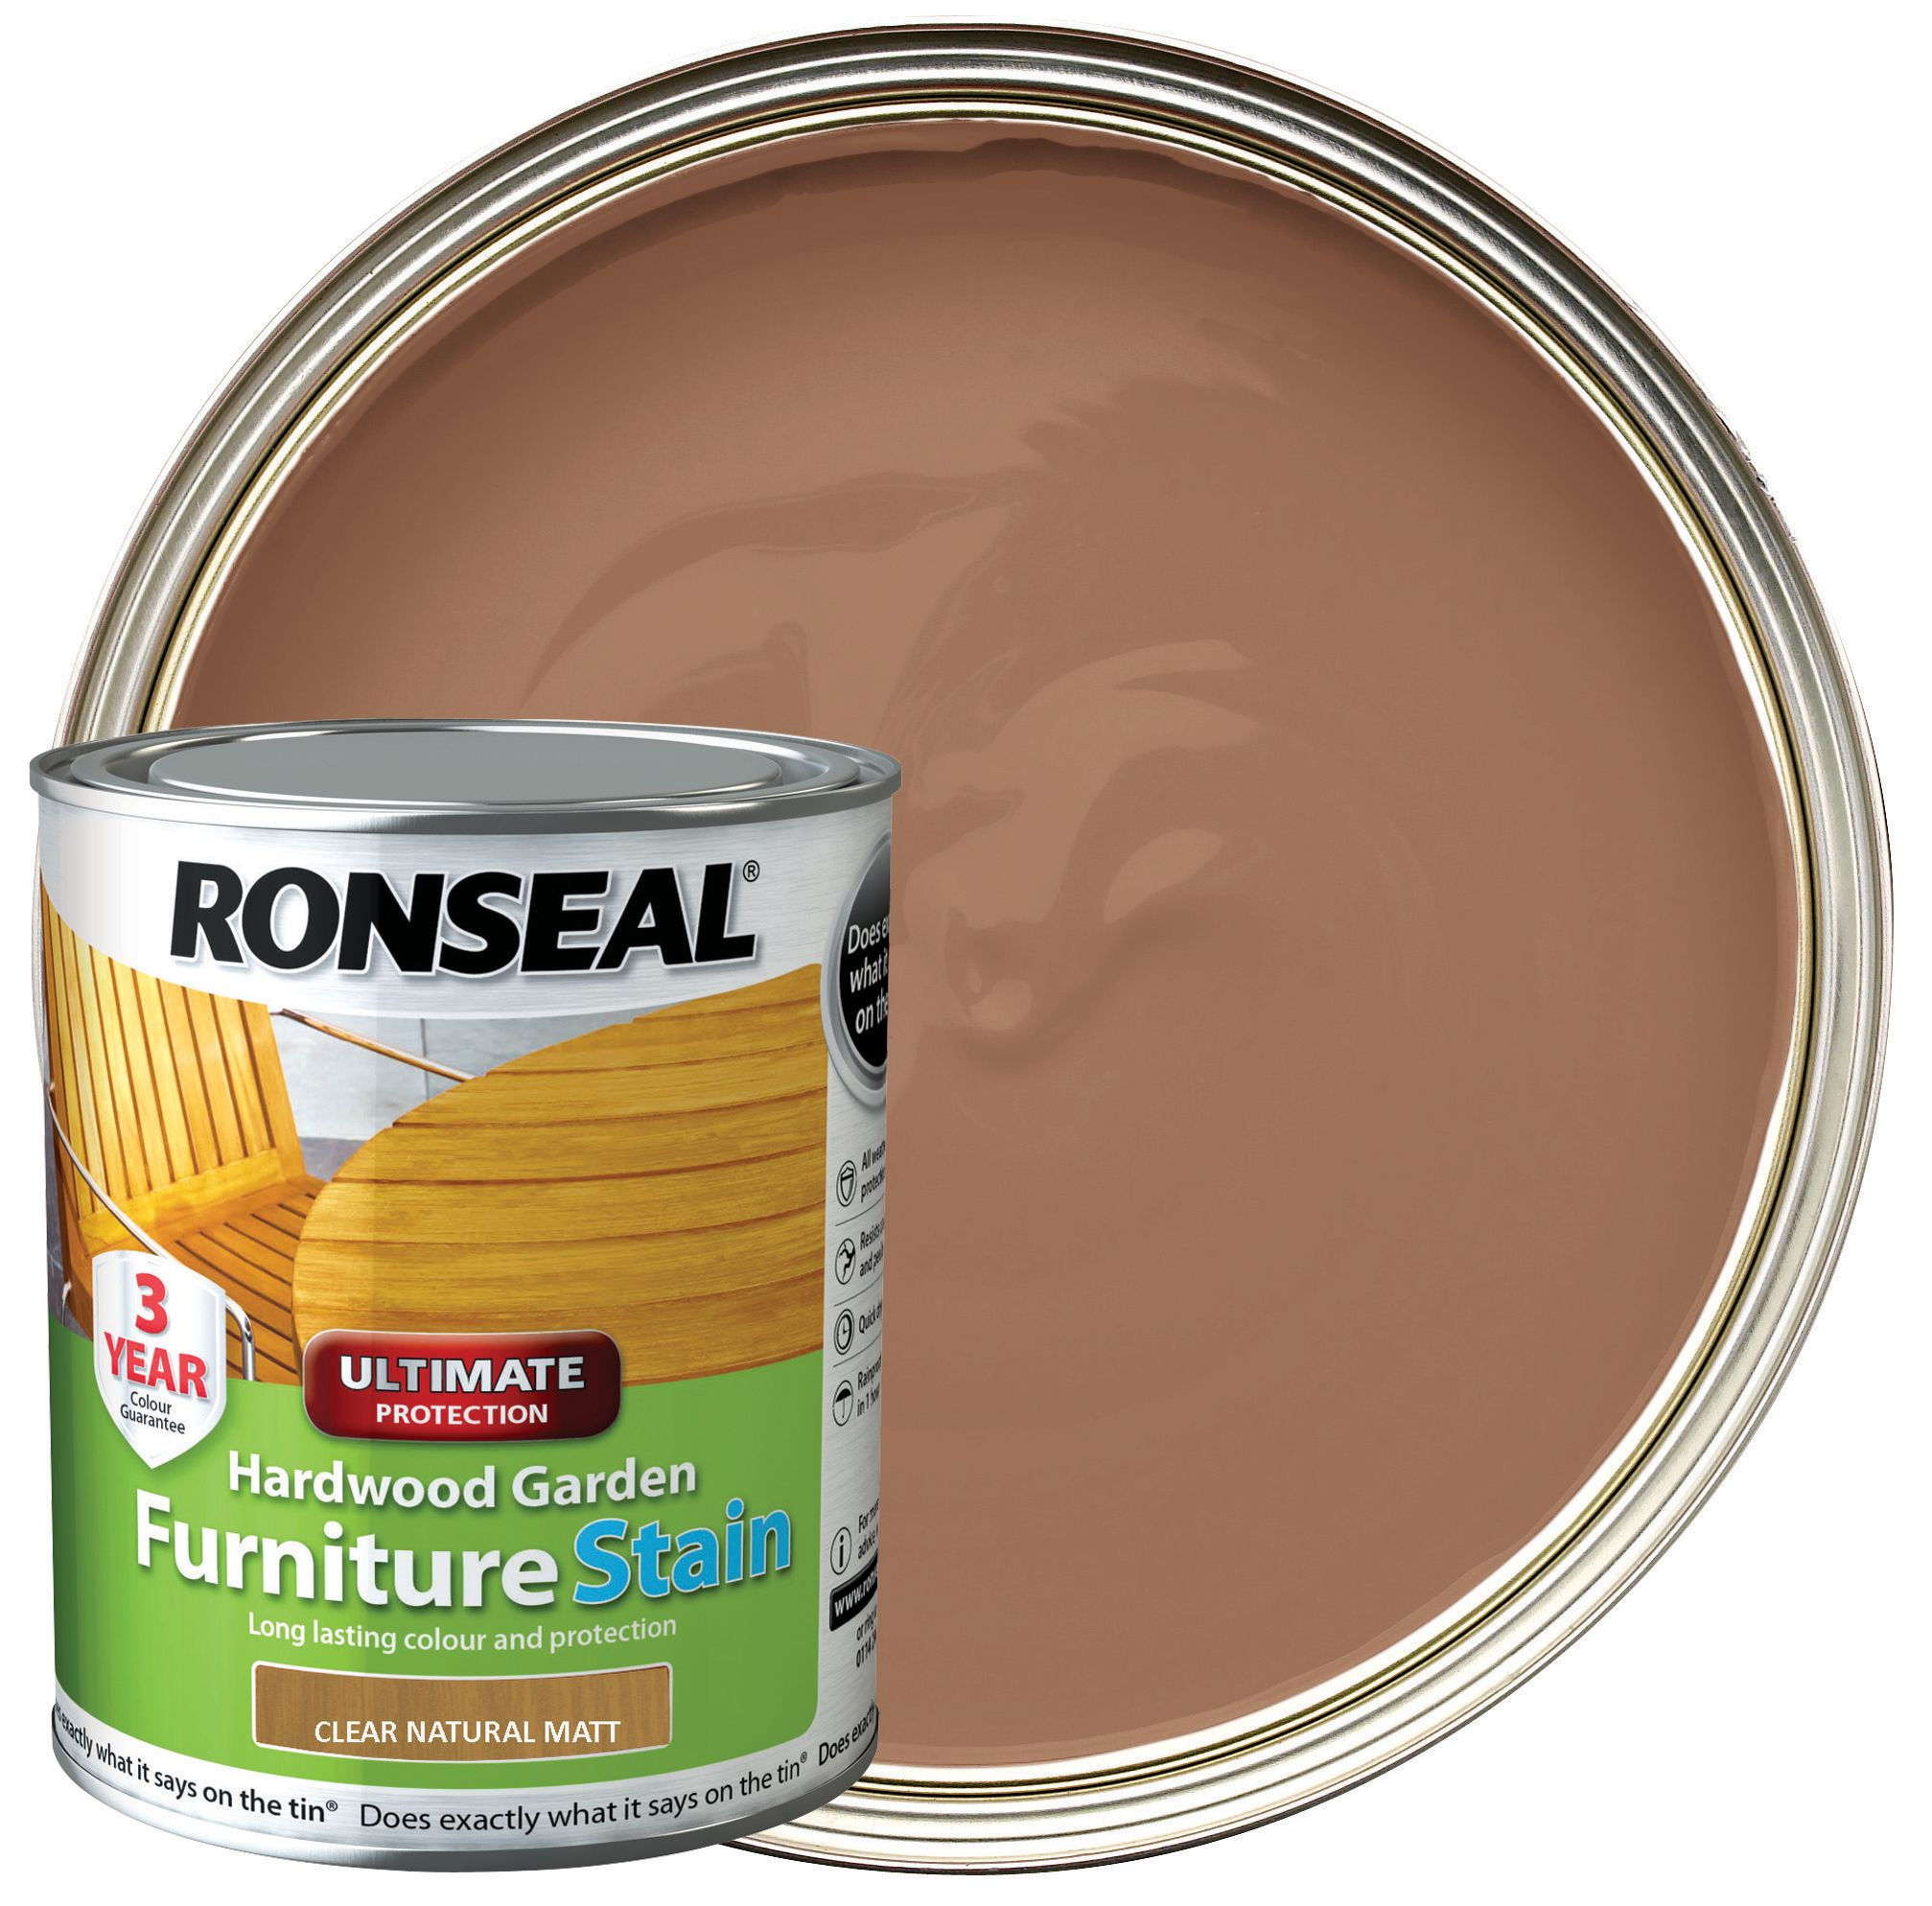 Image of Ronseal Ultimate Protection Hardwood Garden Furniture Stain - Clear Natural Matt 750ml